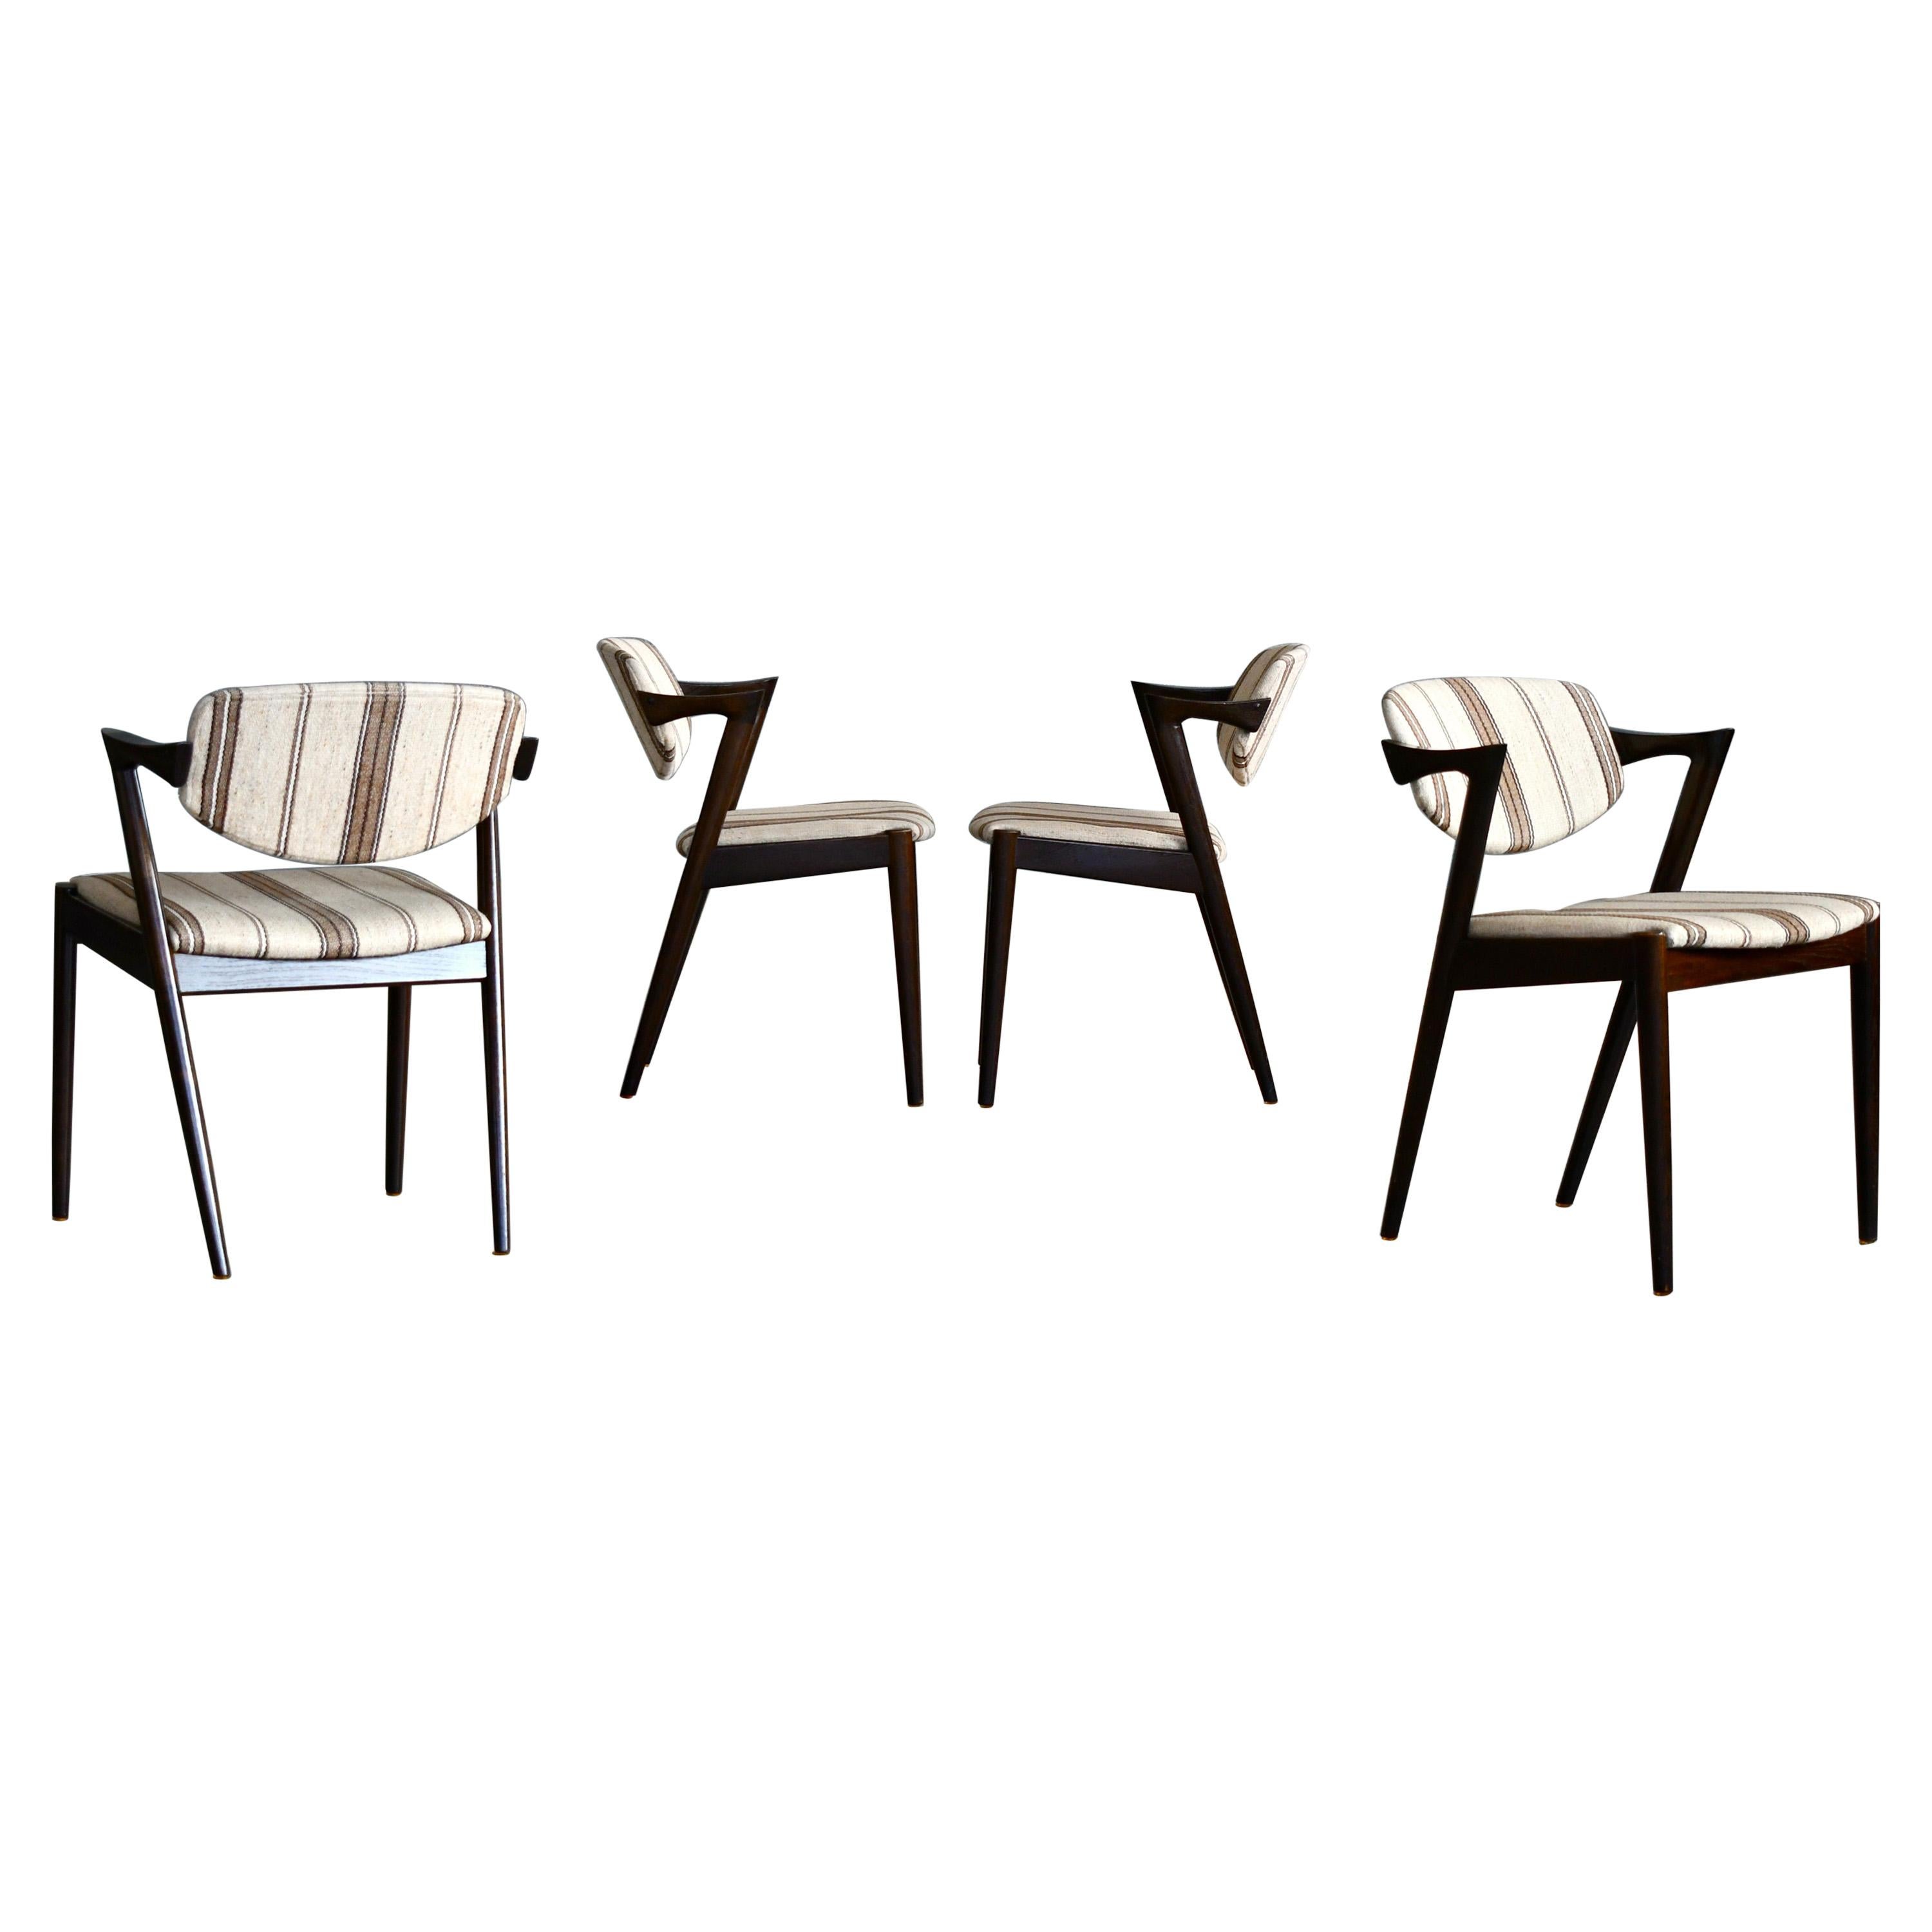 Set of Four Kai Kristiansen Model 42 Dining Chairs in Rosewood Stained Oak